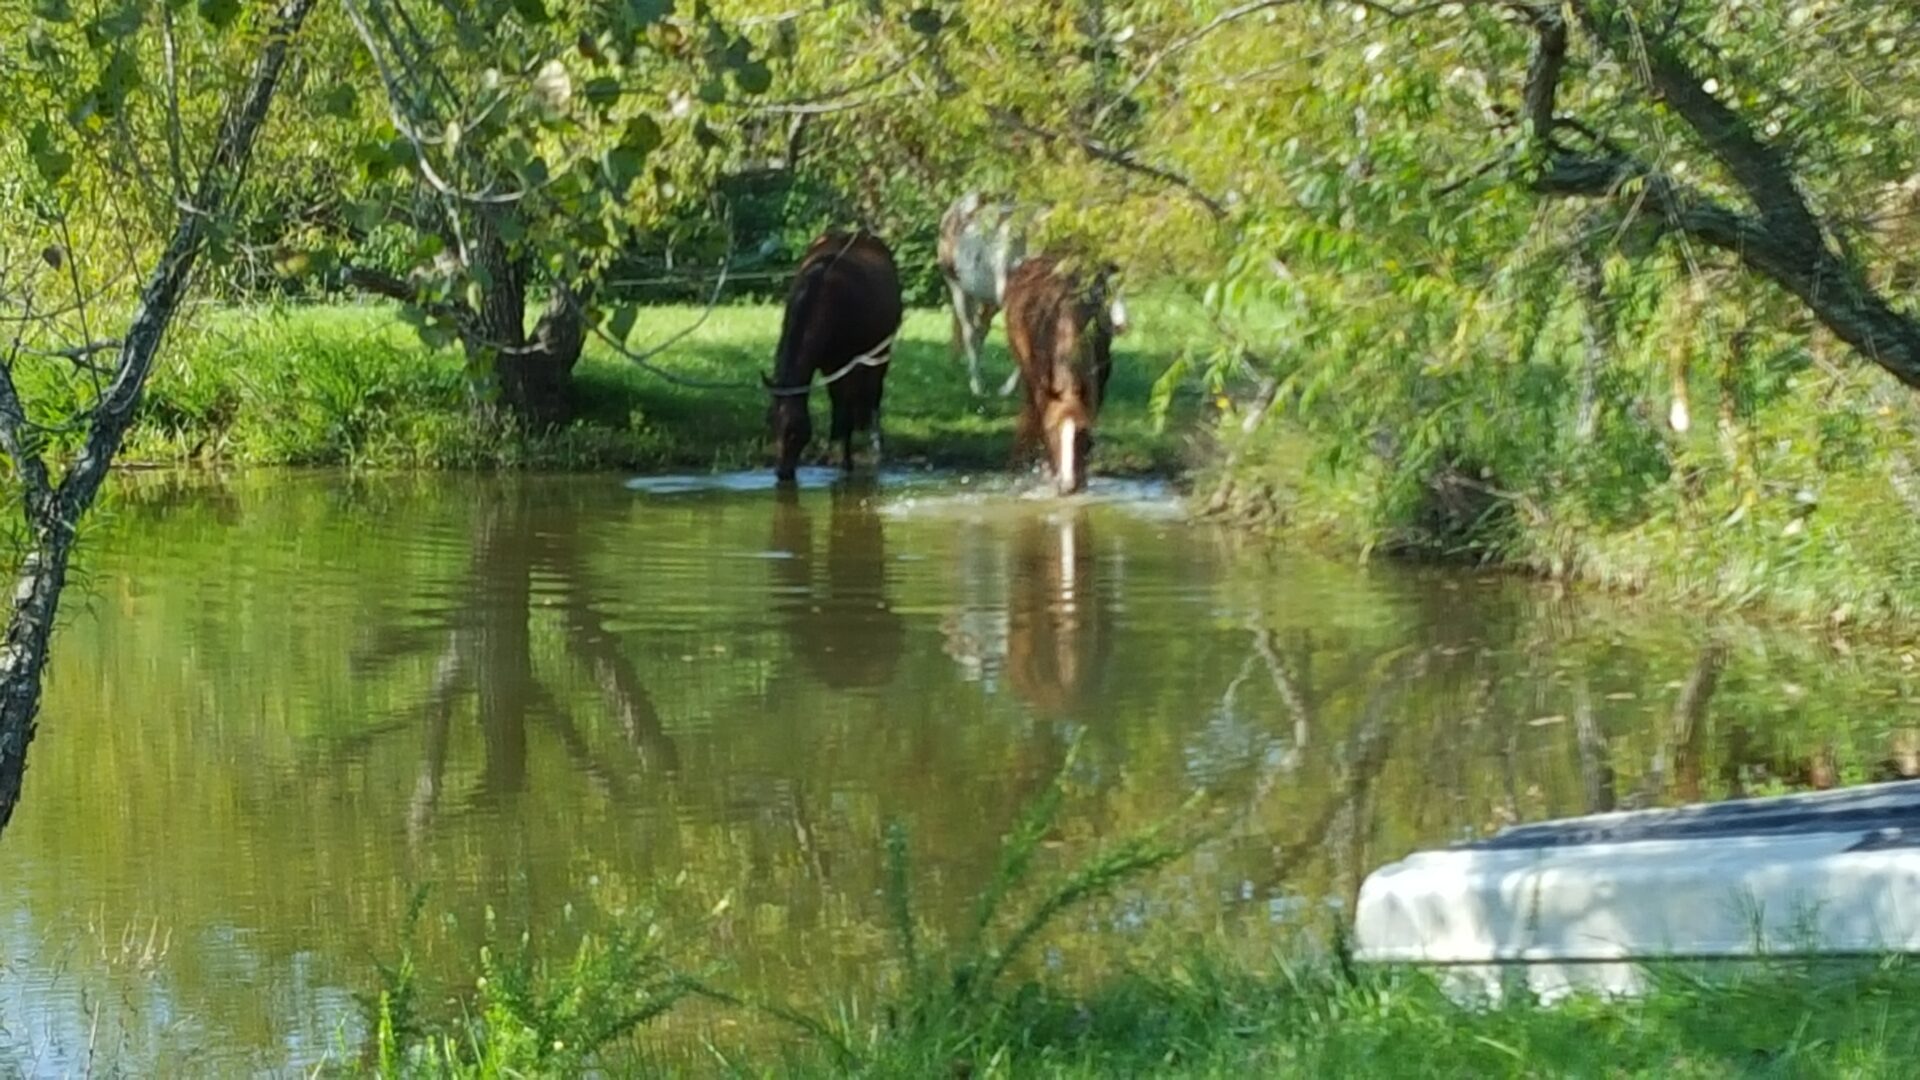 Horses by the pond